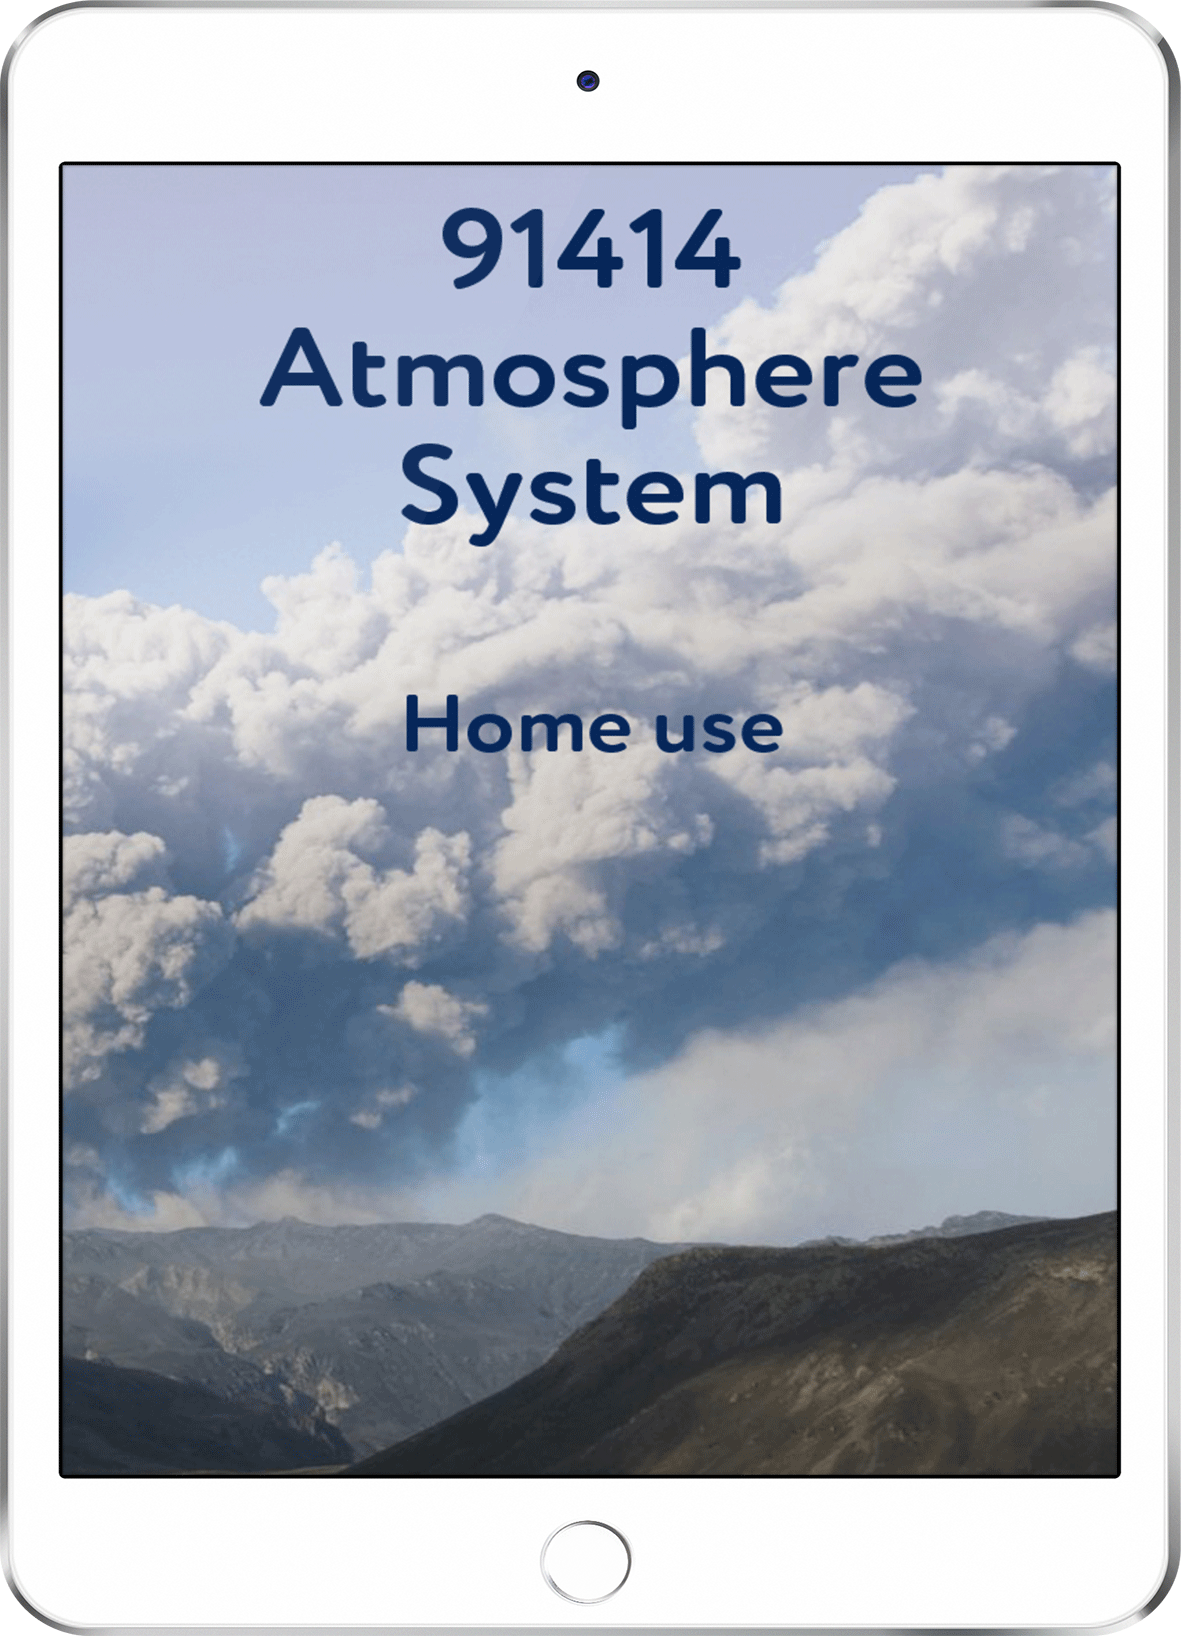 91414 Atmosphere System - Home Use